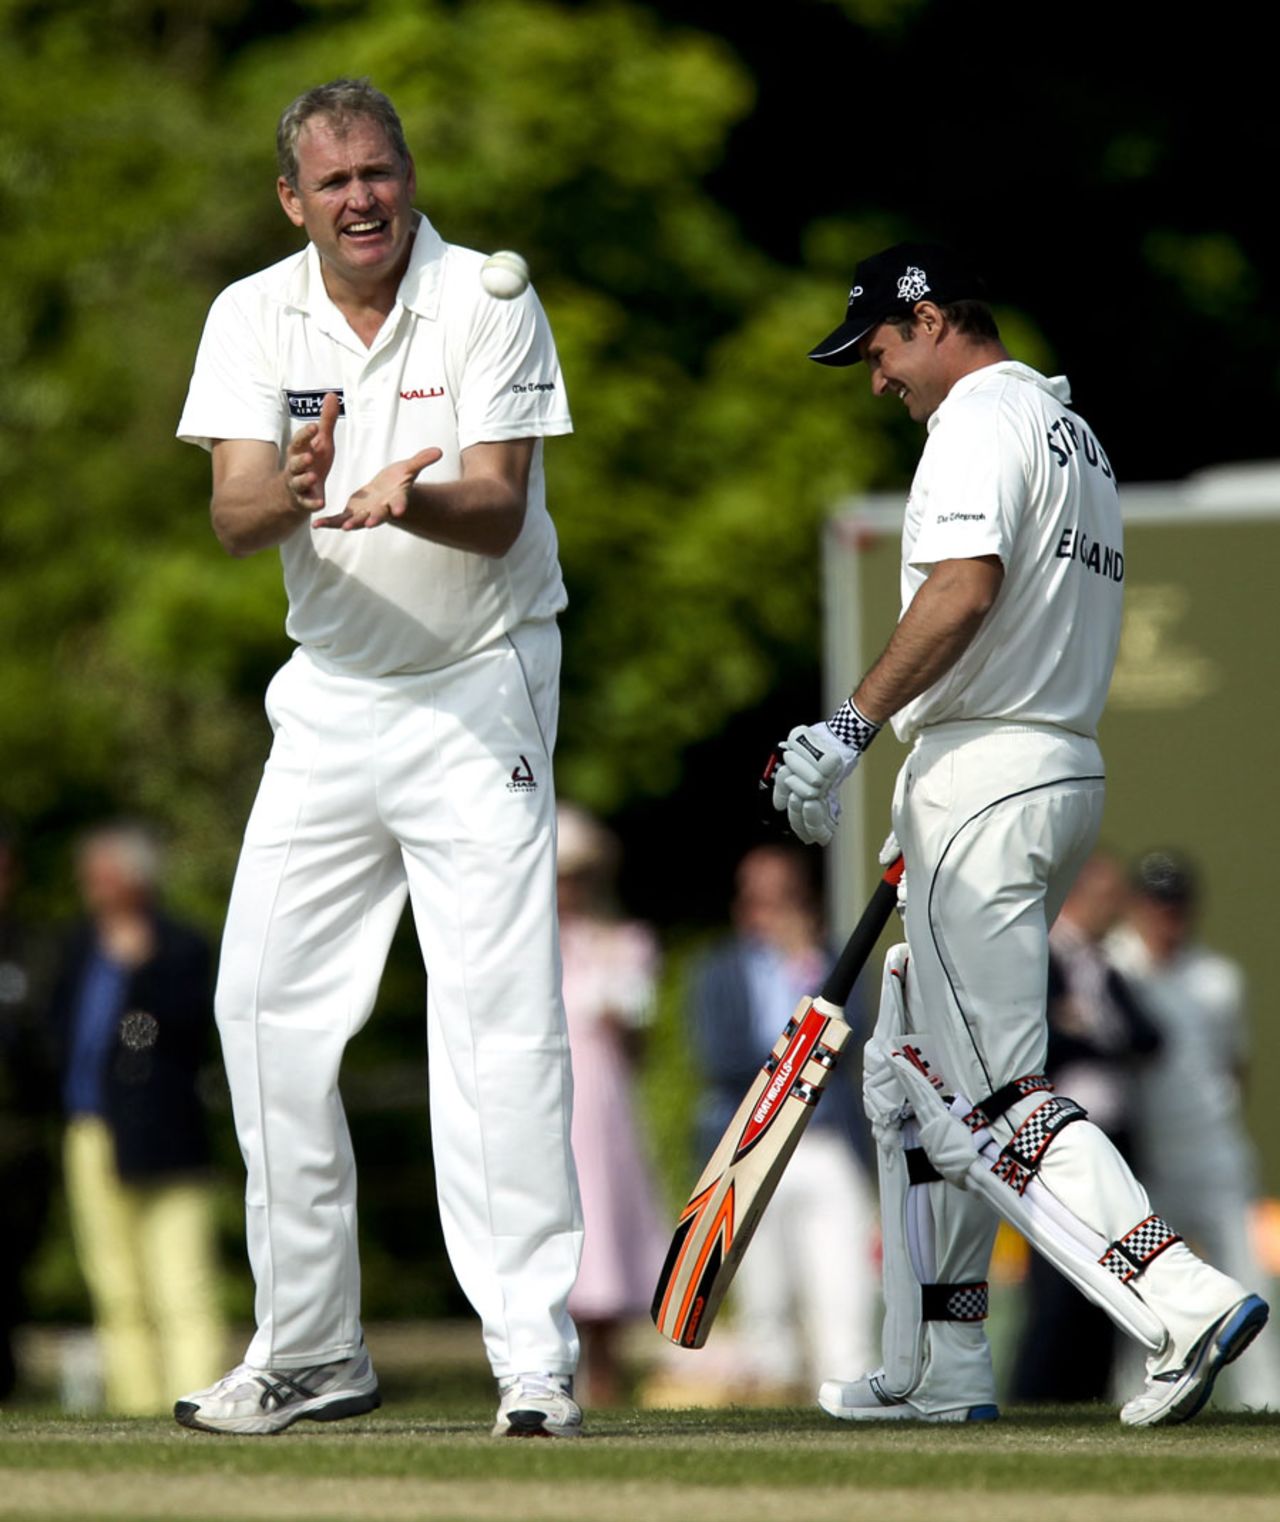 Tom Moody about to catch the ball at a charity T20 match, Cirencester Cricket Club, June 9, 2013